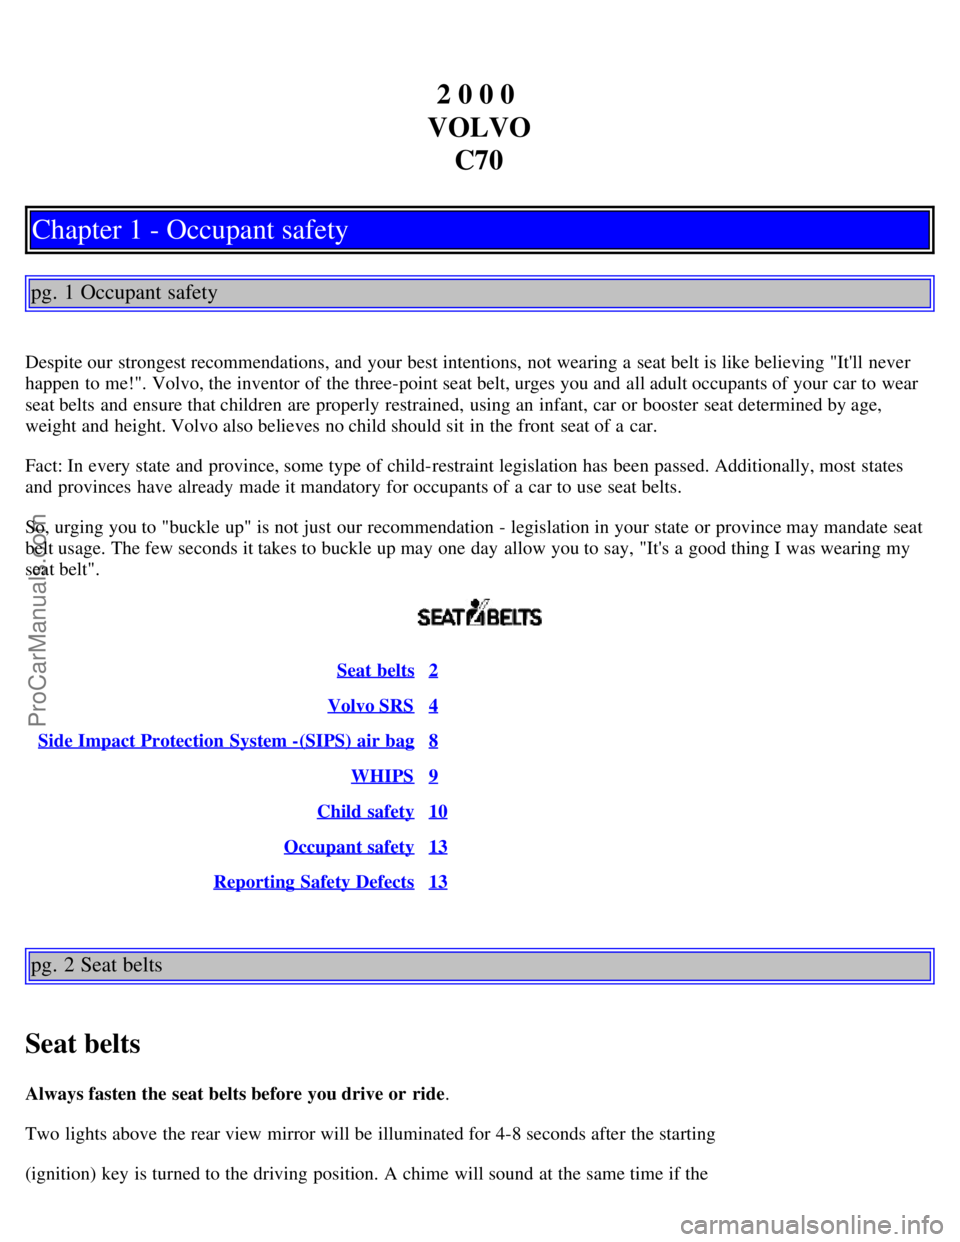 VOLVO C70 2000  Owners Manual 2 0 0 0 
VOLVO C70
Chapter 1 - Occupant safety
pg. 1 Occupant safety
Despite our strongest recommendations, and  your best intentions,  not wearing a  seat belt is like believing "Itll  never
happen 